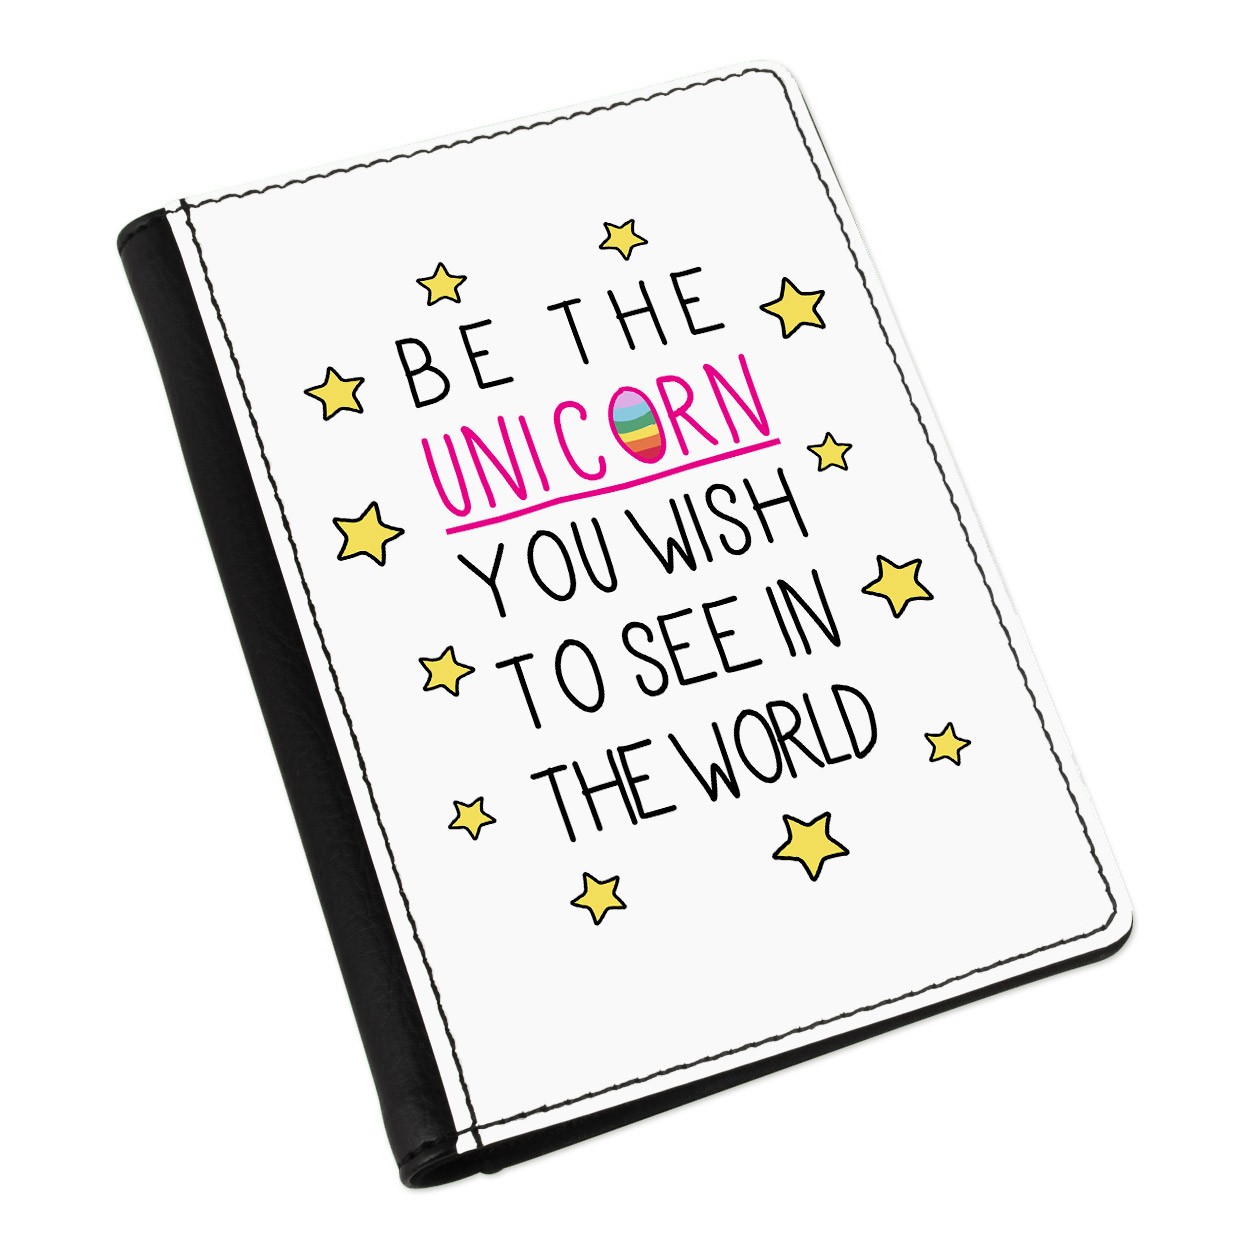 Be the Unicorn You Wish to See in the World Passport Holder Cover